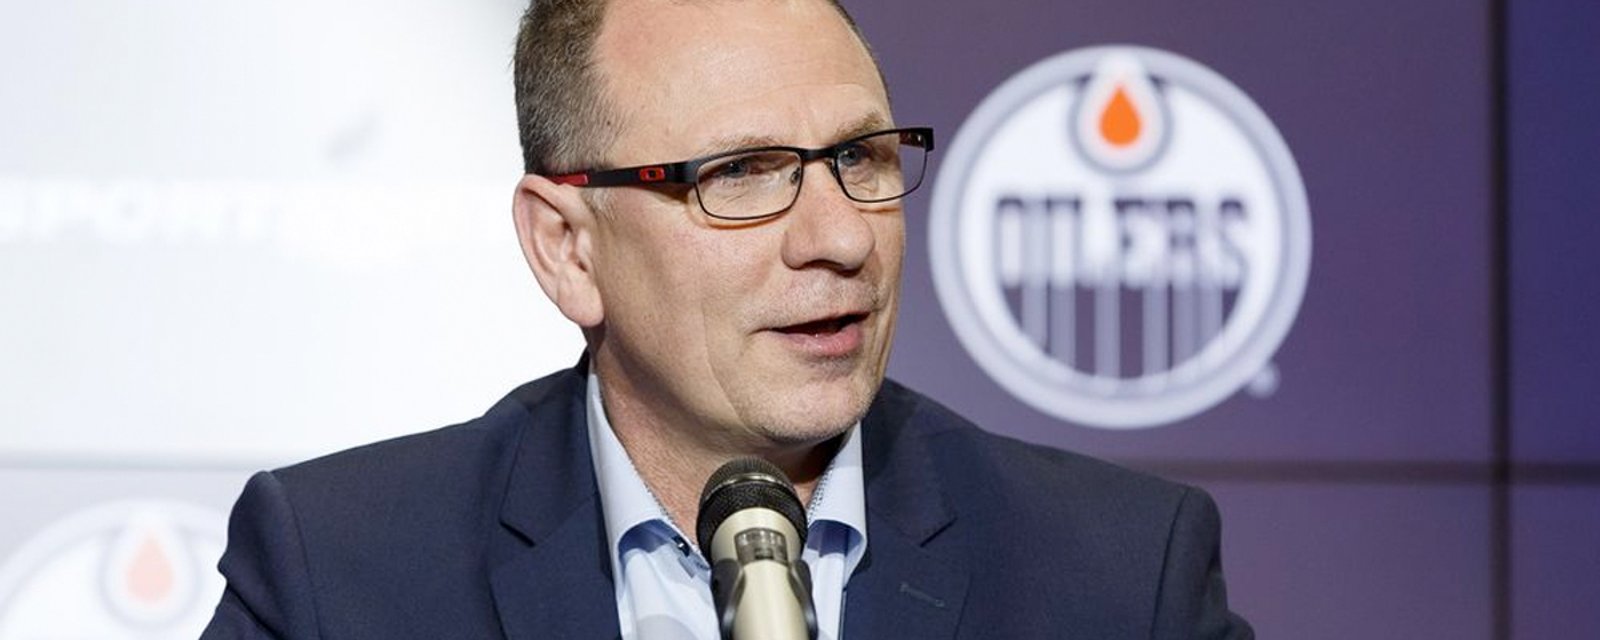 Oilers GM search down to three candidates